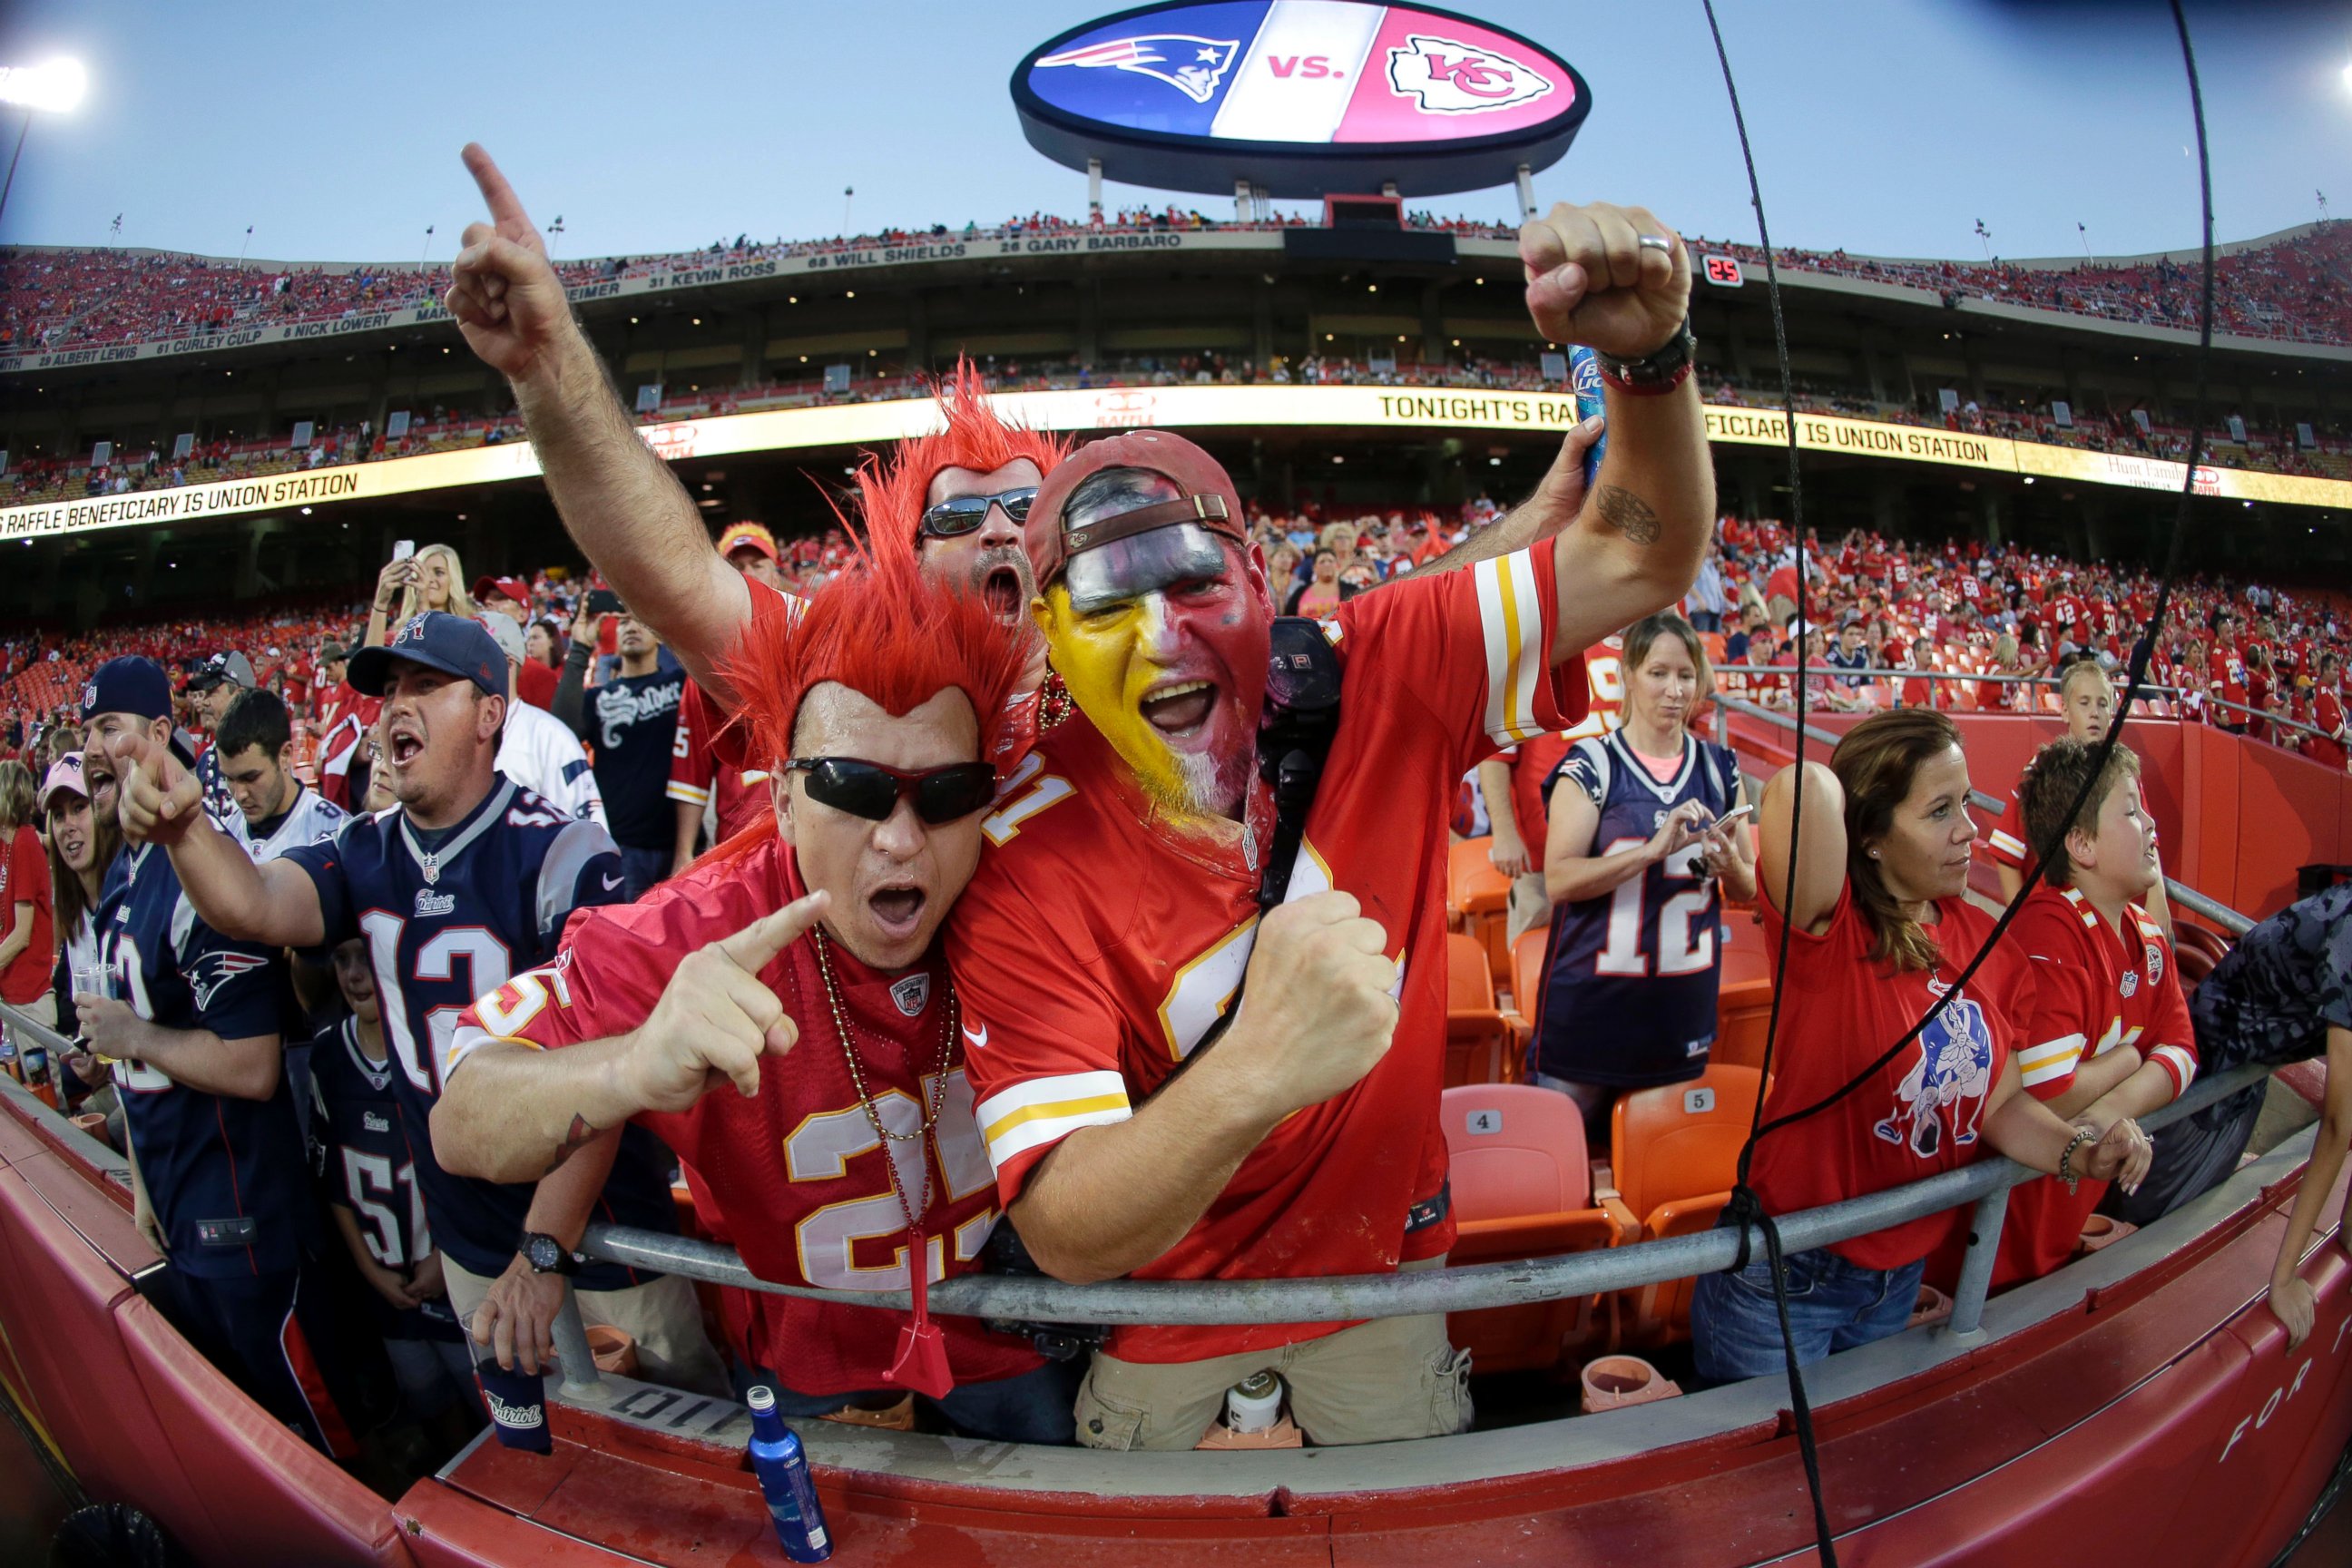 PHOTO: Football fans cheer before the start of an NFL football game between the Kansas City Chiefs and the New England Patriots at Arrowhead Stadium, Sept. 29, 2014, in Kansas City, Mo.